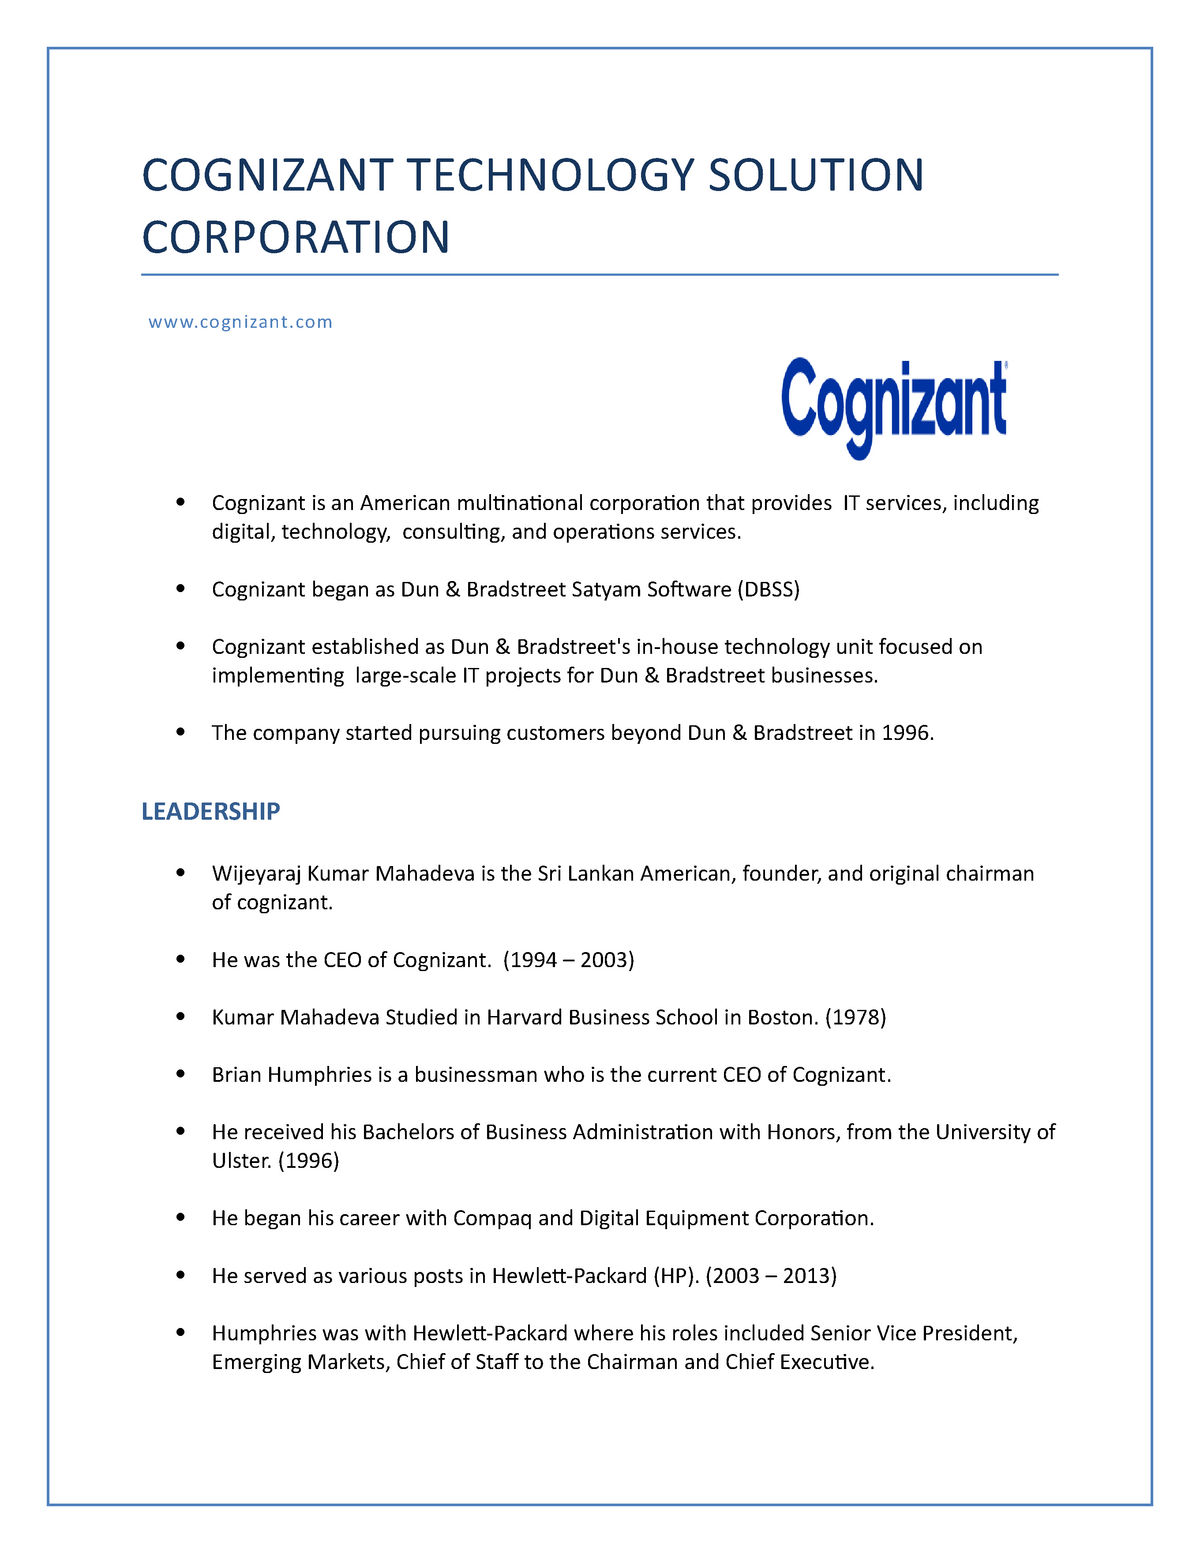 vision statement of cognizant technology solutions